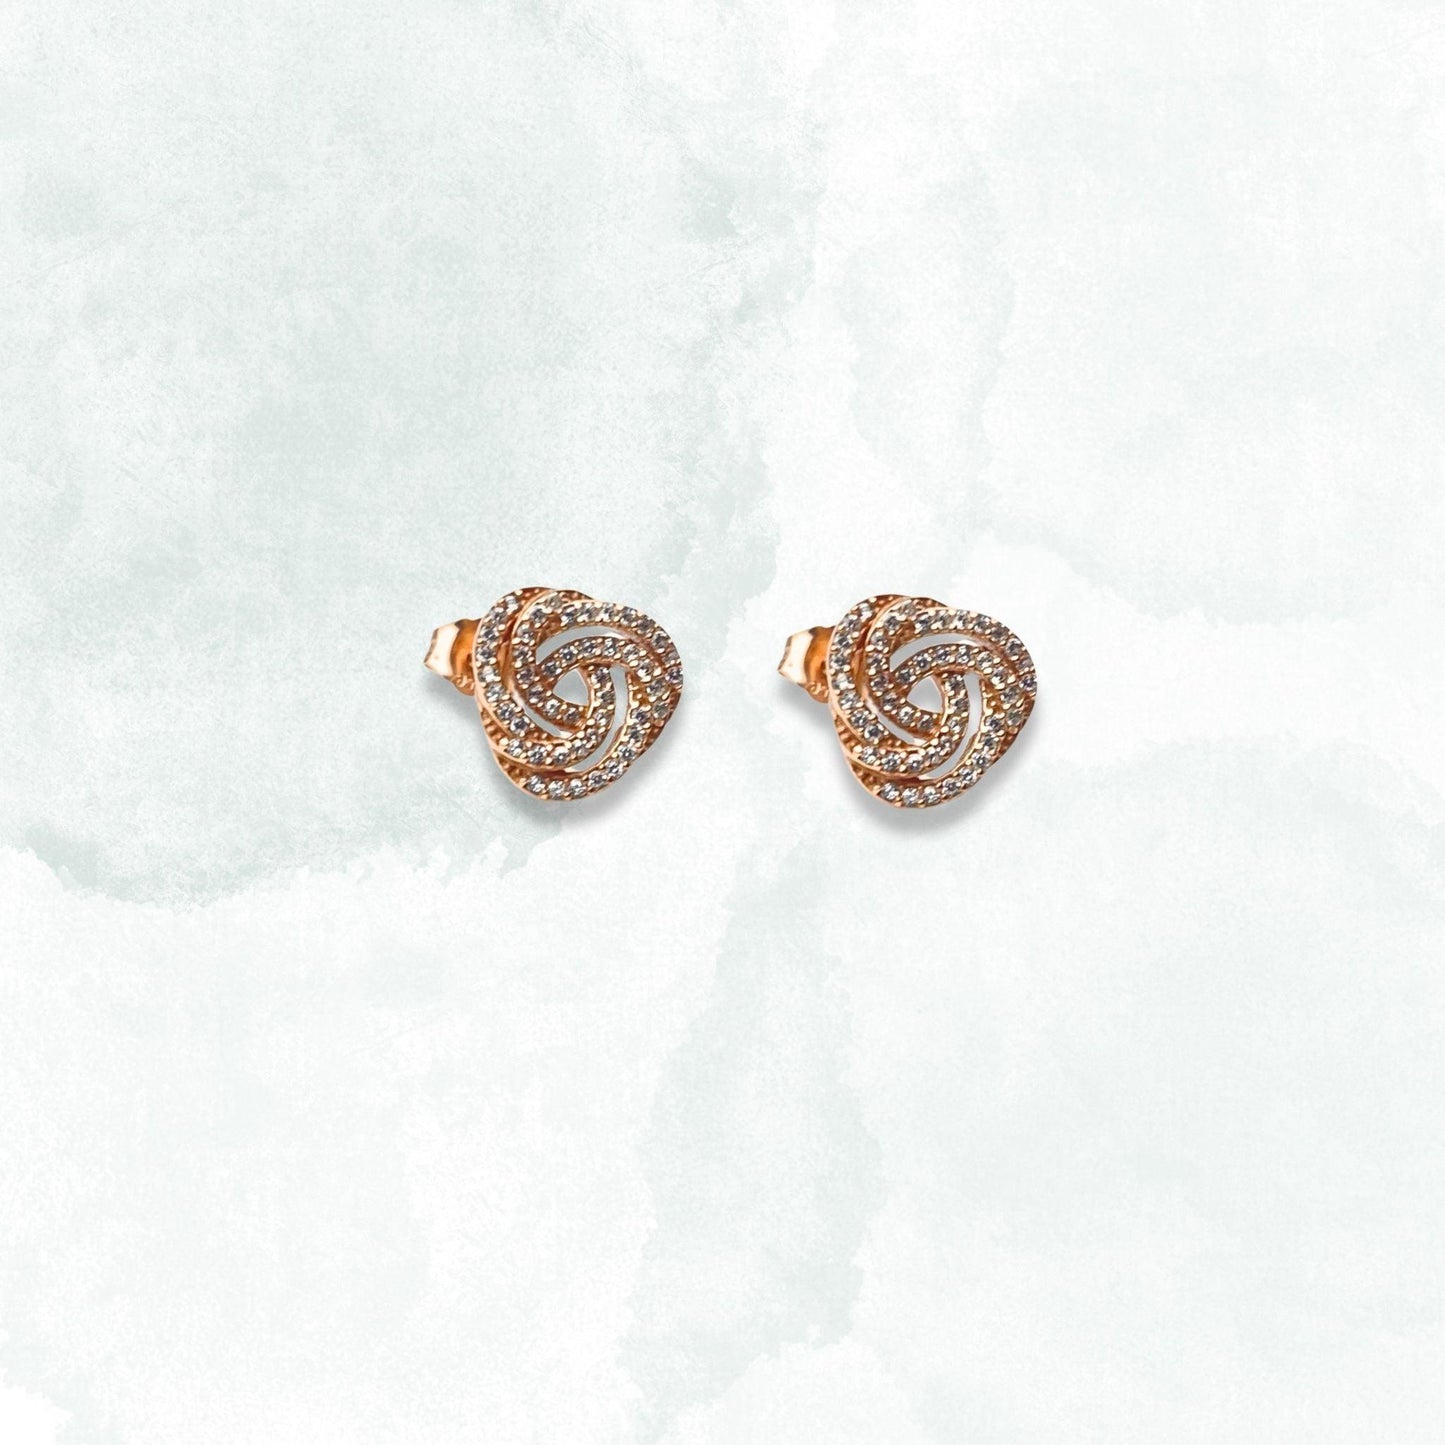 Two diamond stud earrings in rose gold, complemented by a sterling silver ring. Elegant and timeless jewelry pieces